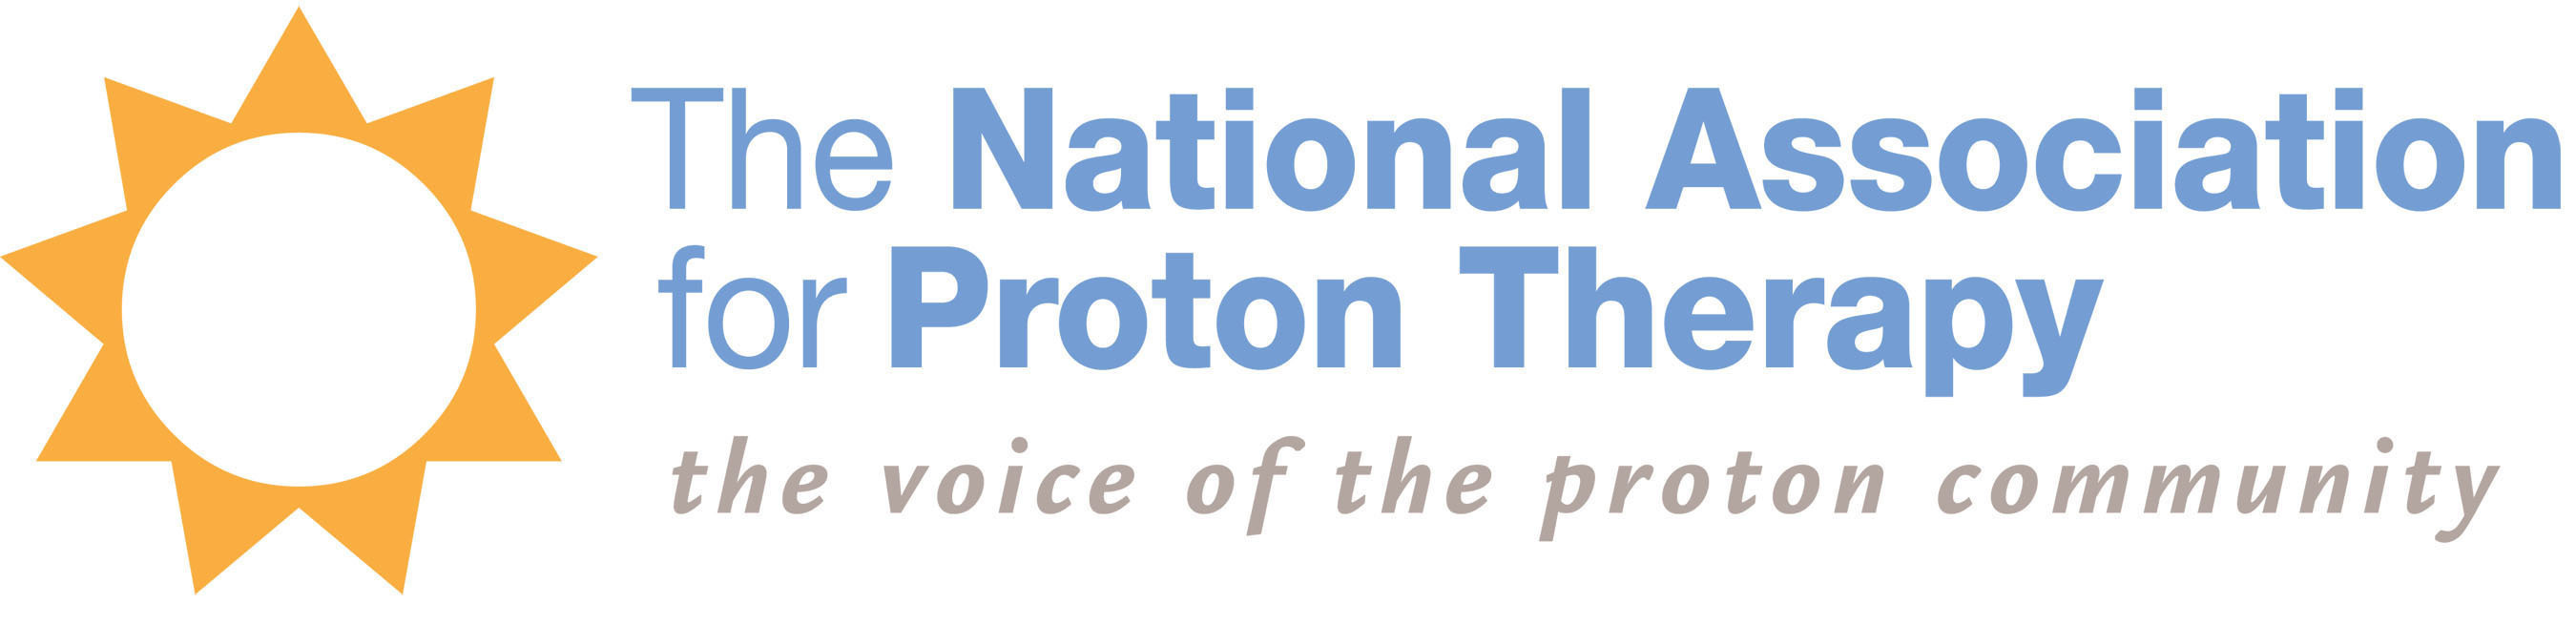 The National Association for Proton Therapy (NAPT)